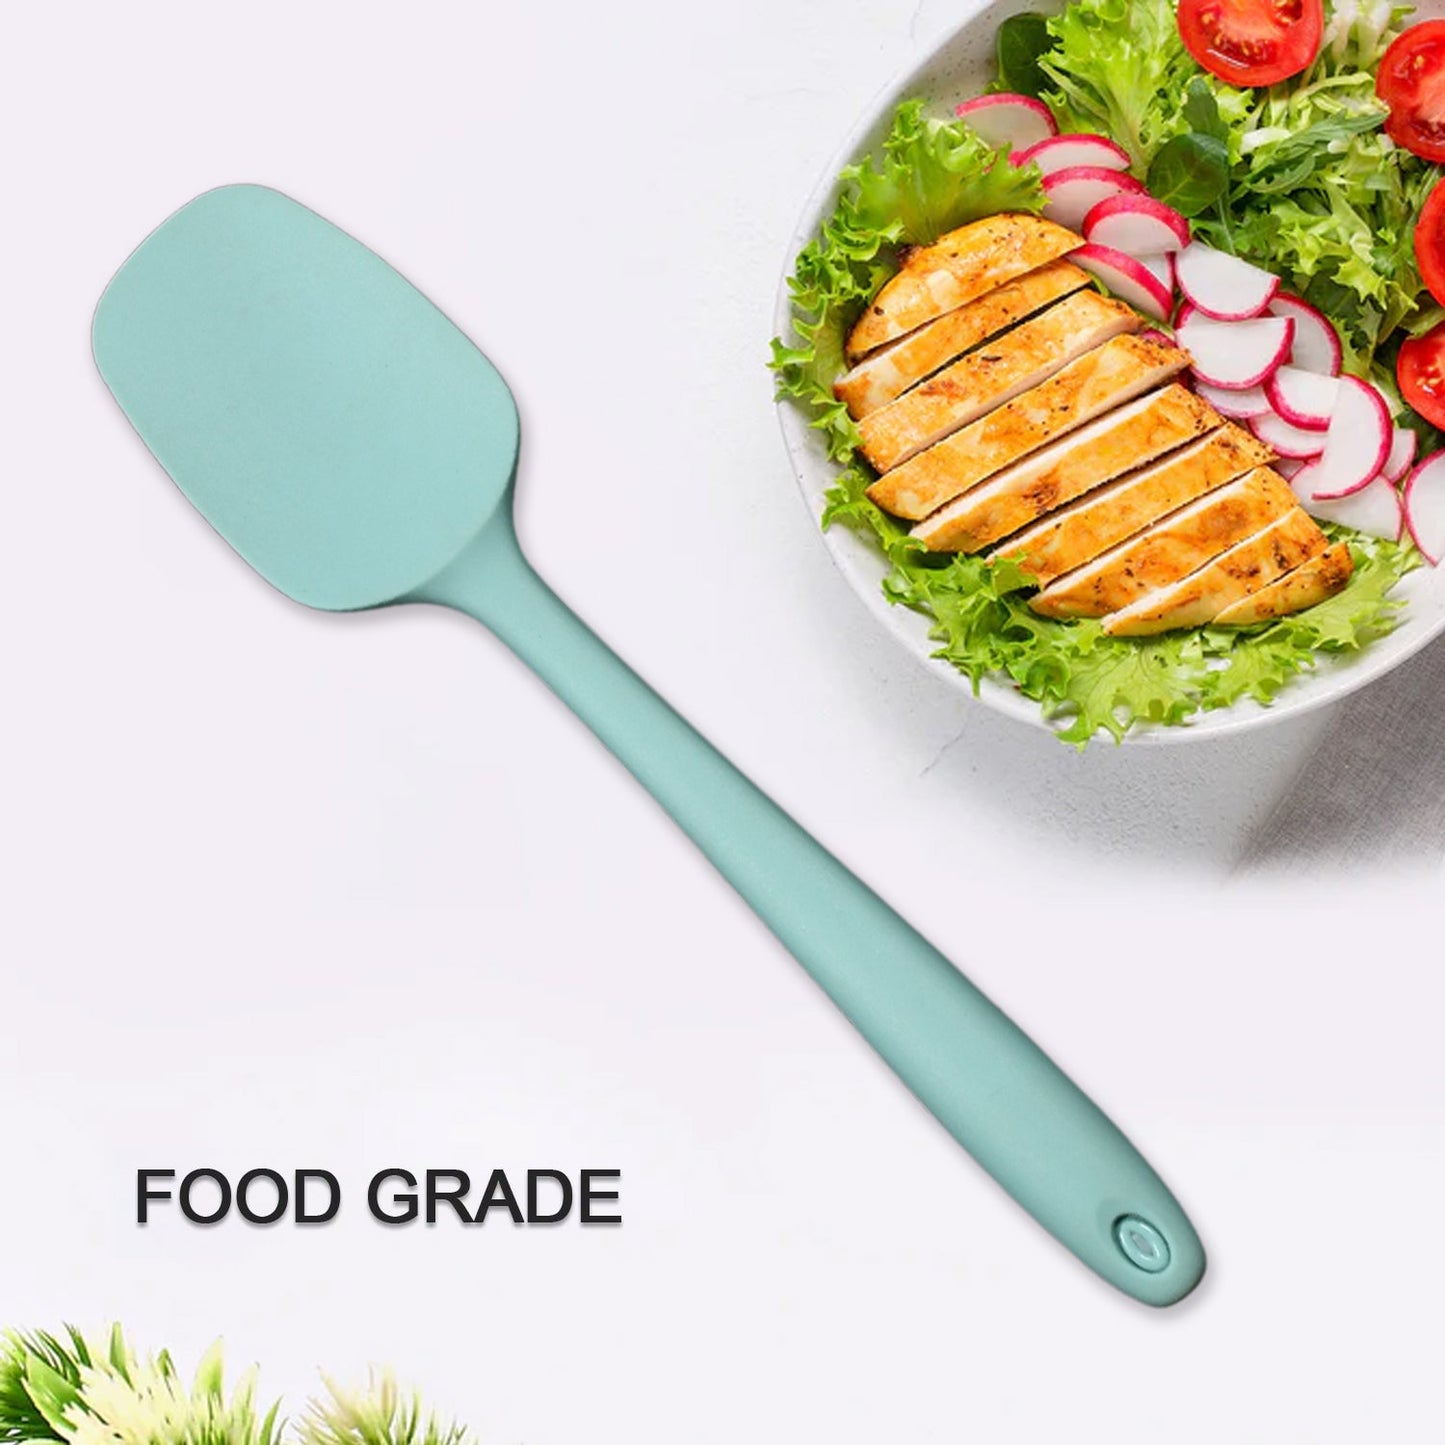 Food Grade Silicone Rubber Spatula Set Kitchen Utensils for Baking, Cooking, High Heat Resistant Non Stick Dishwasher Safe BPA-Free (27cm)